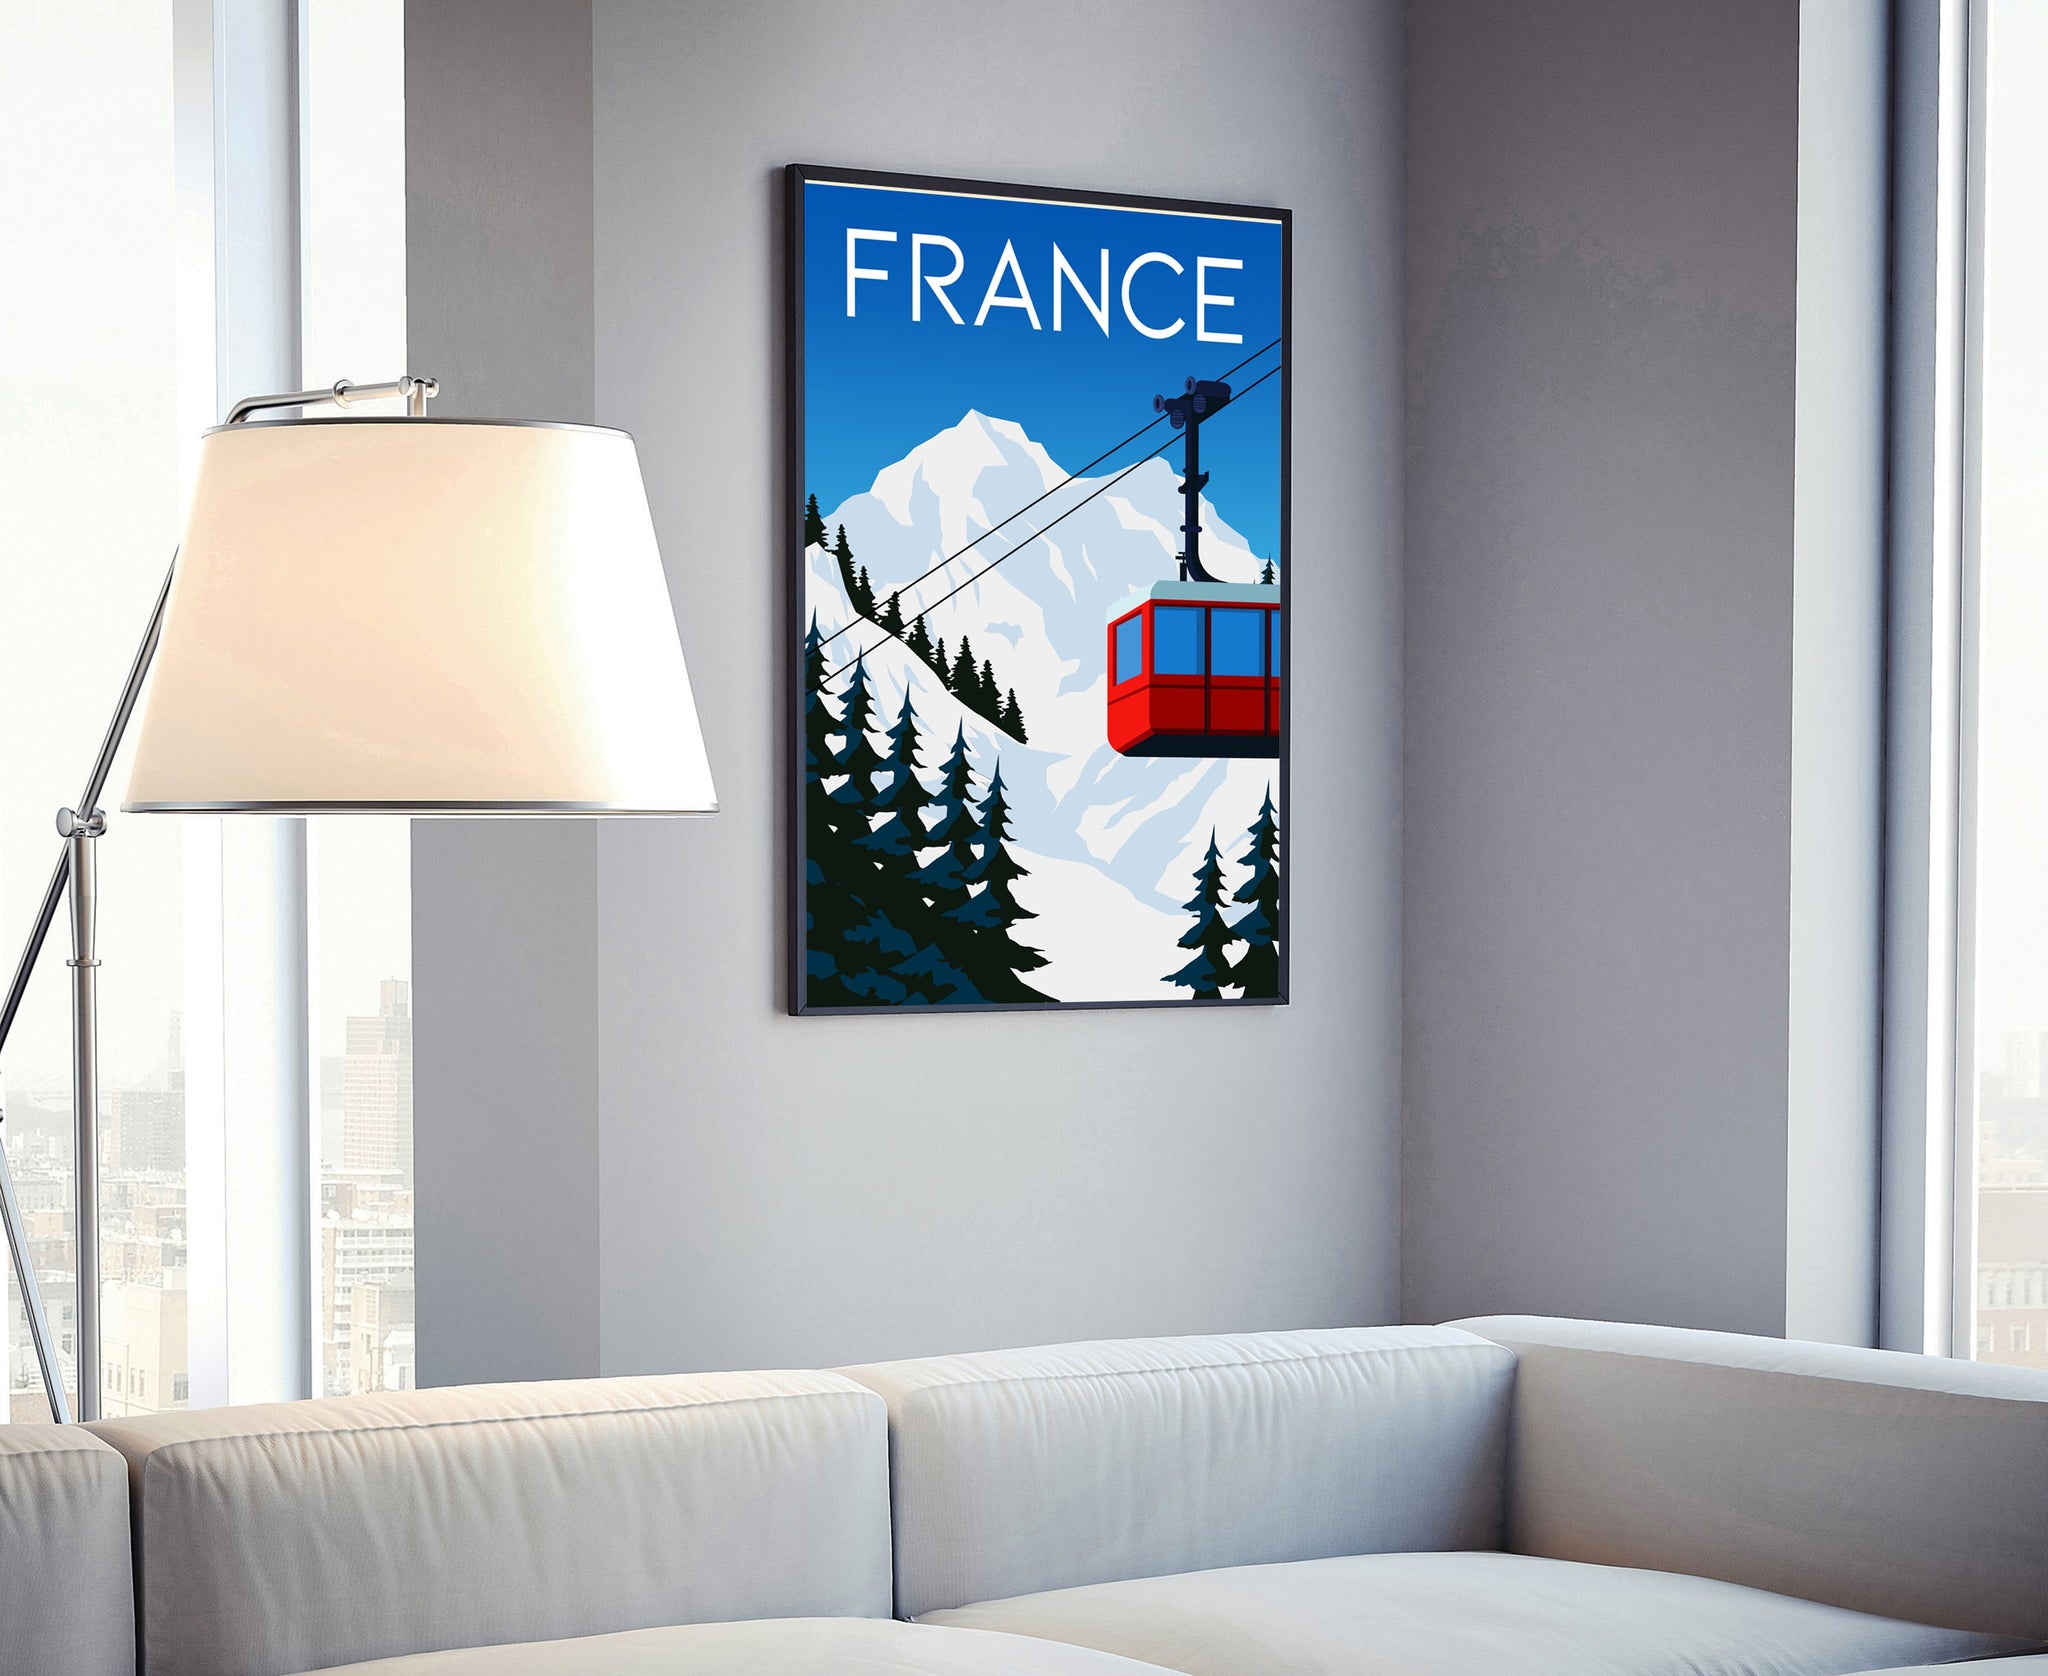 FRANCE travel poster, France cityscape poster, France landmark poster wall art, Home wall art, Office wall decoration, Birthday gift